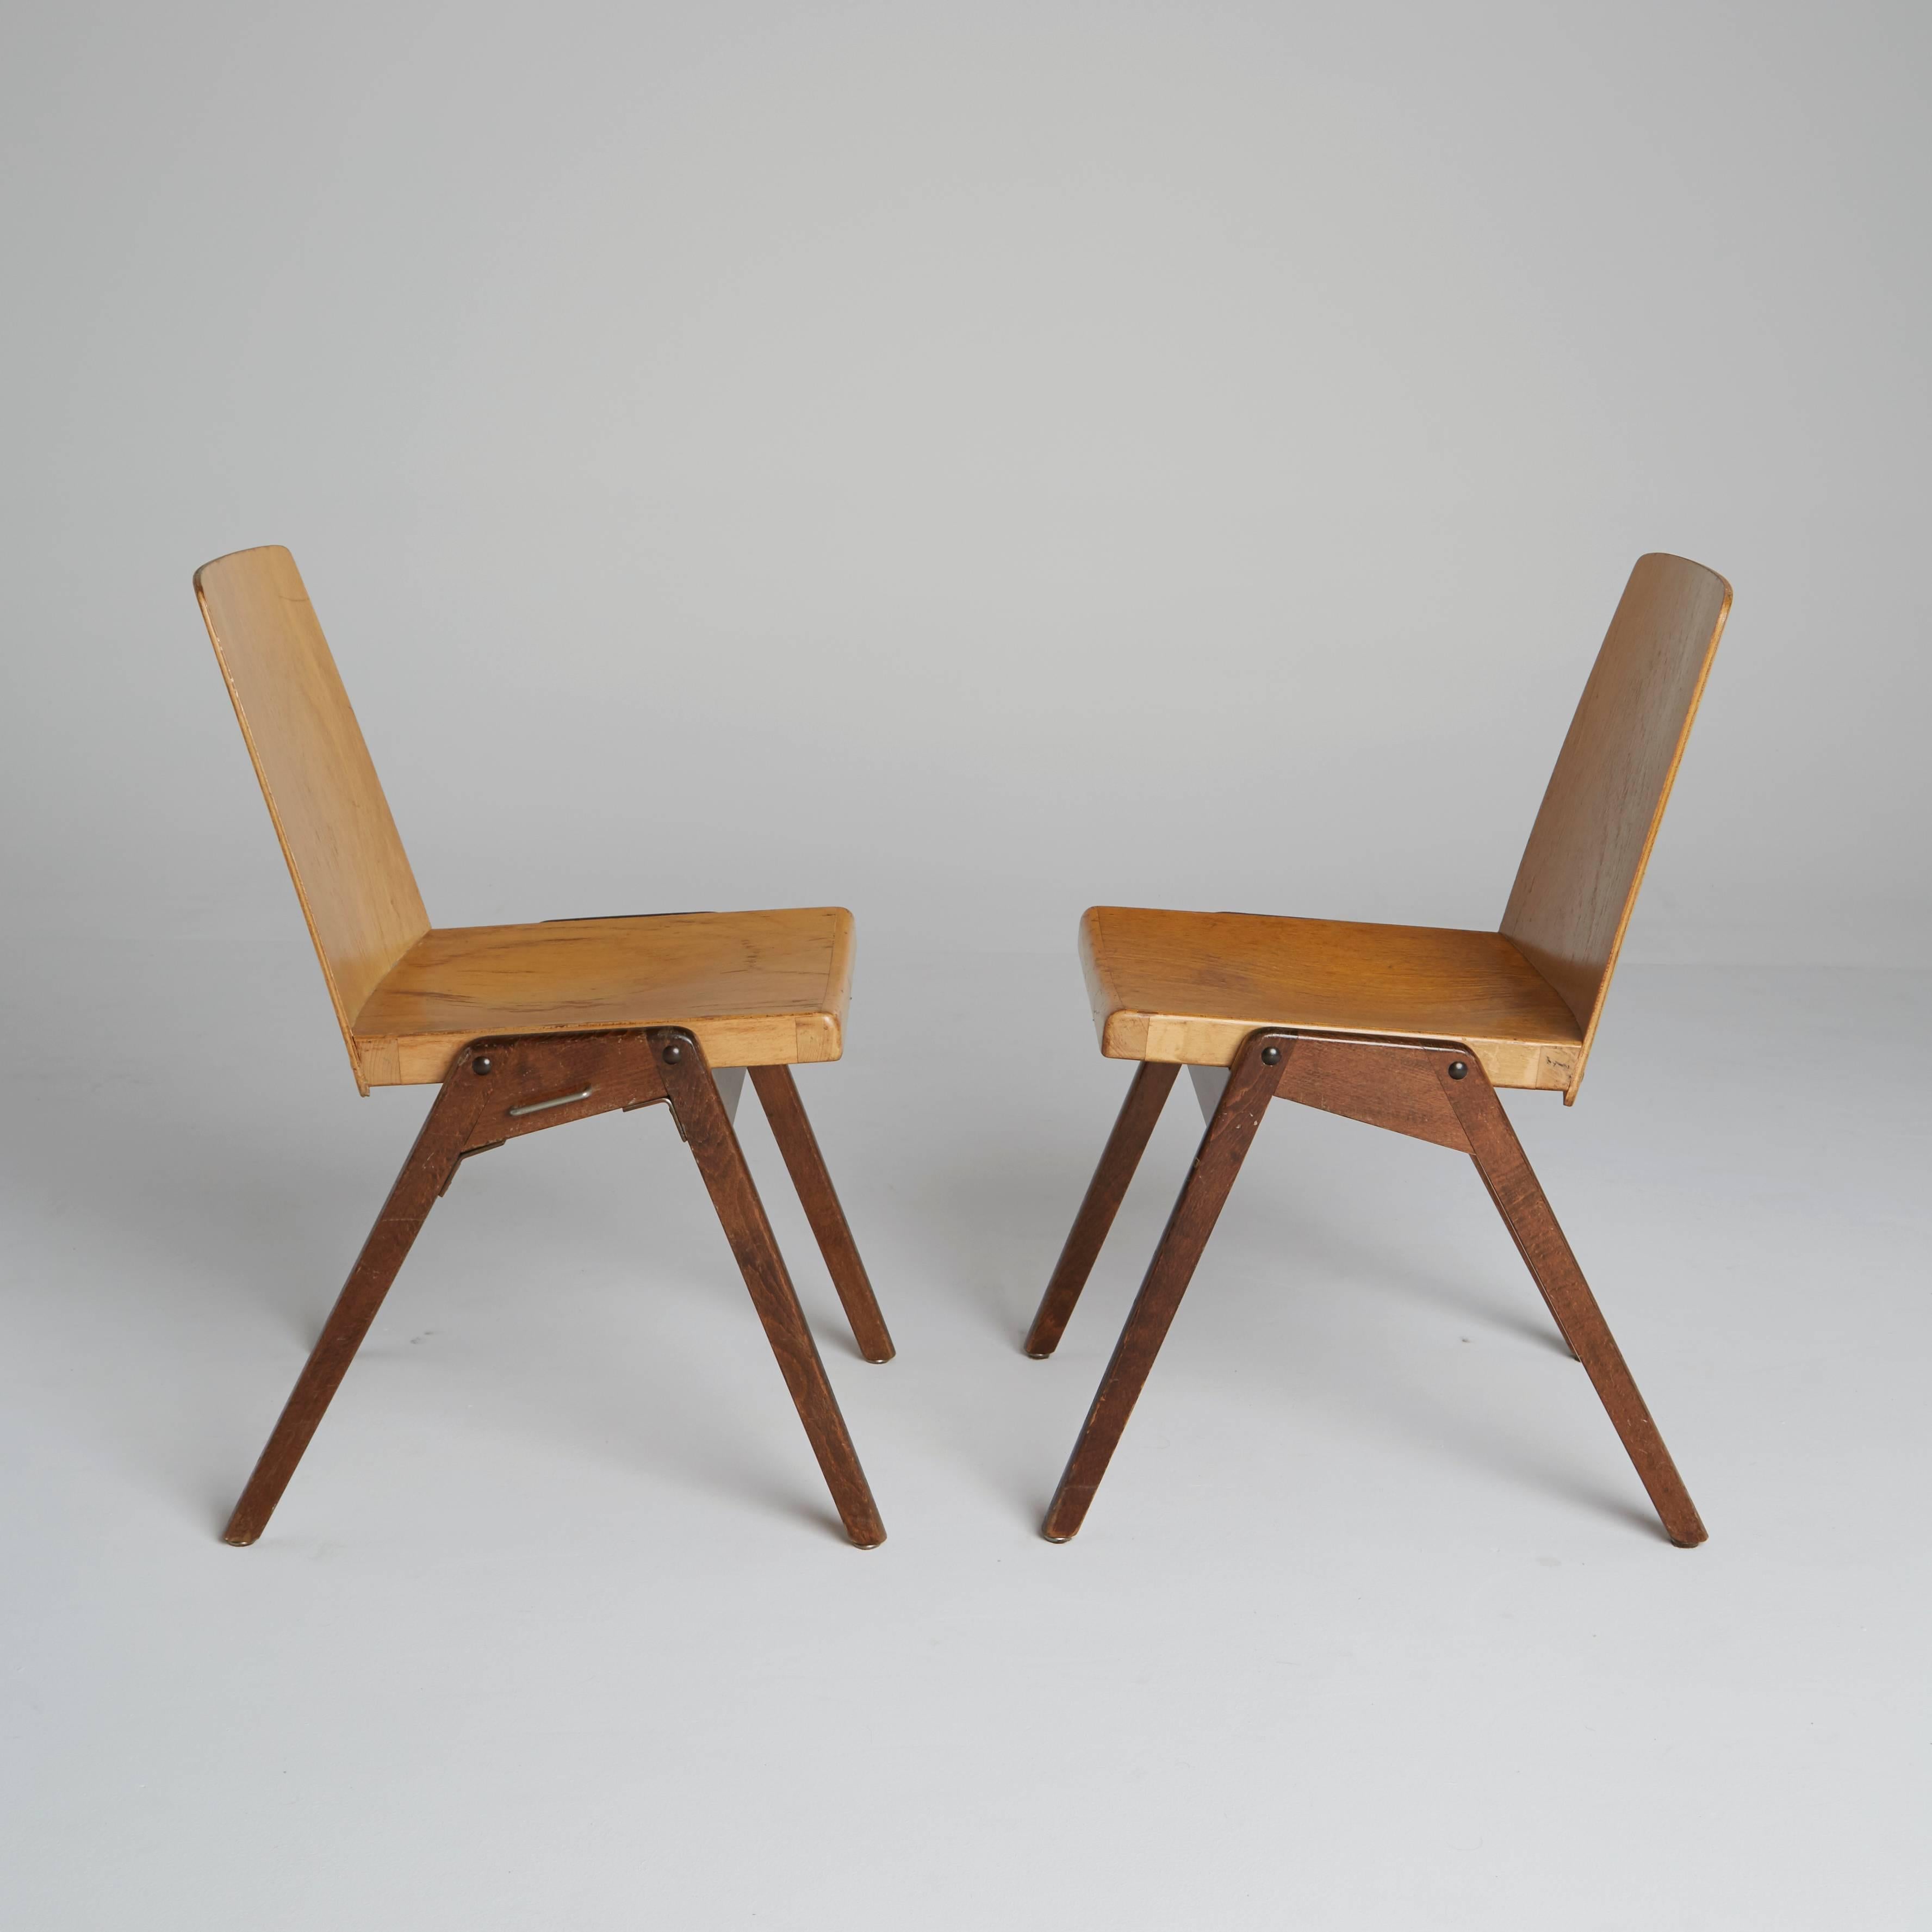 Created by Thonet, a company considered to have changed the industry of wooden furniture in the 19th century with their innovative techniques and quality craftsmanship. These two-tone, wooden side chairs are very rare to find. Their contrasting